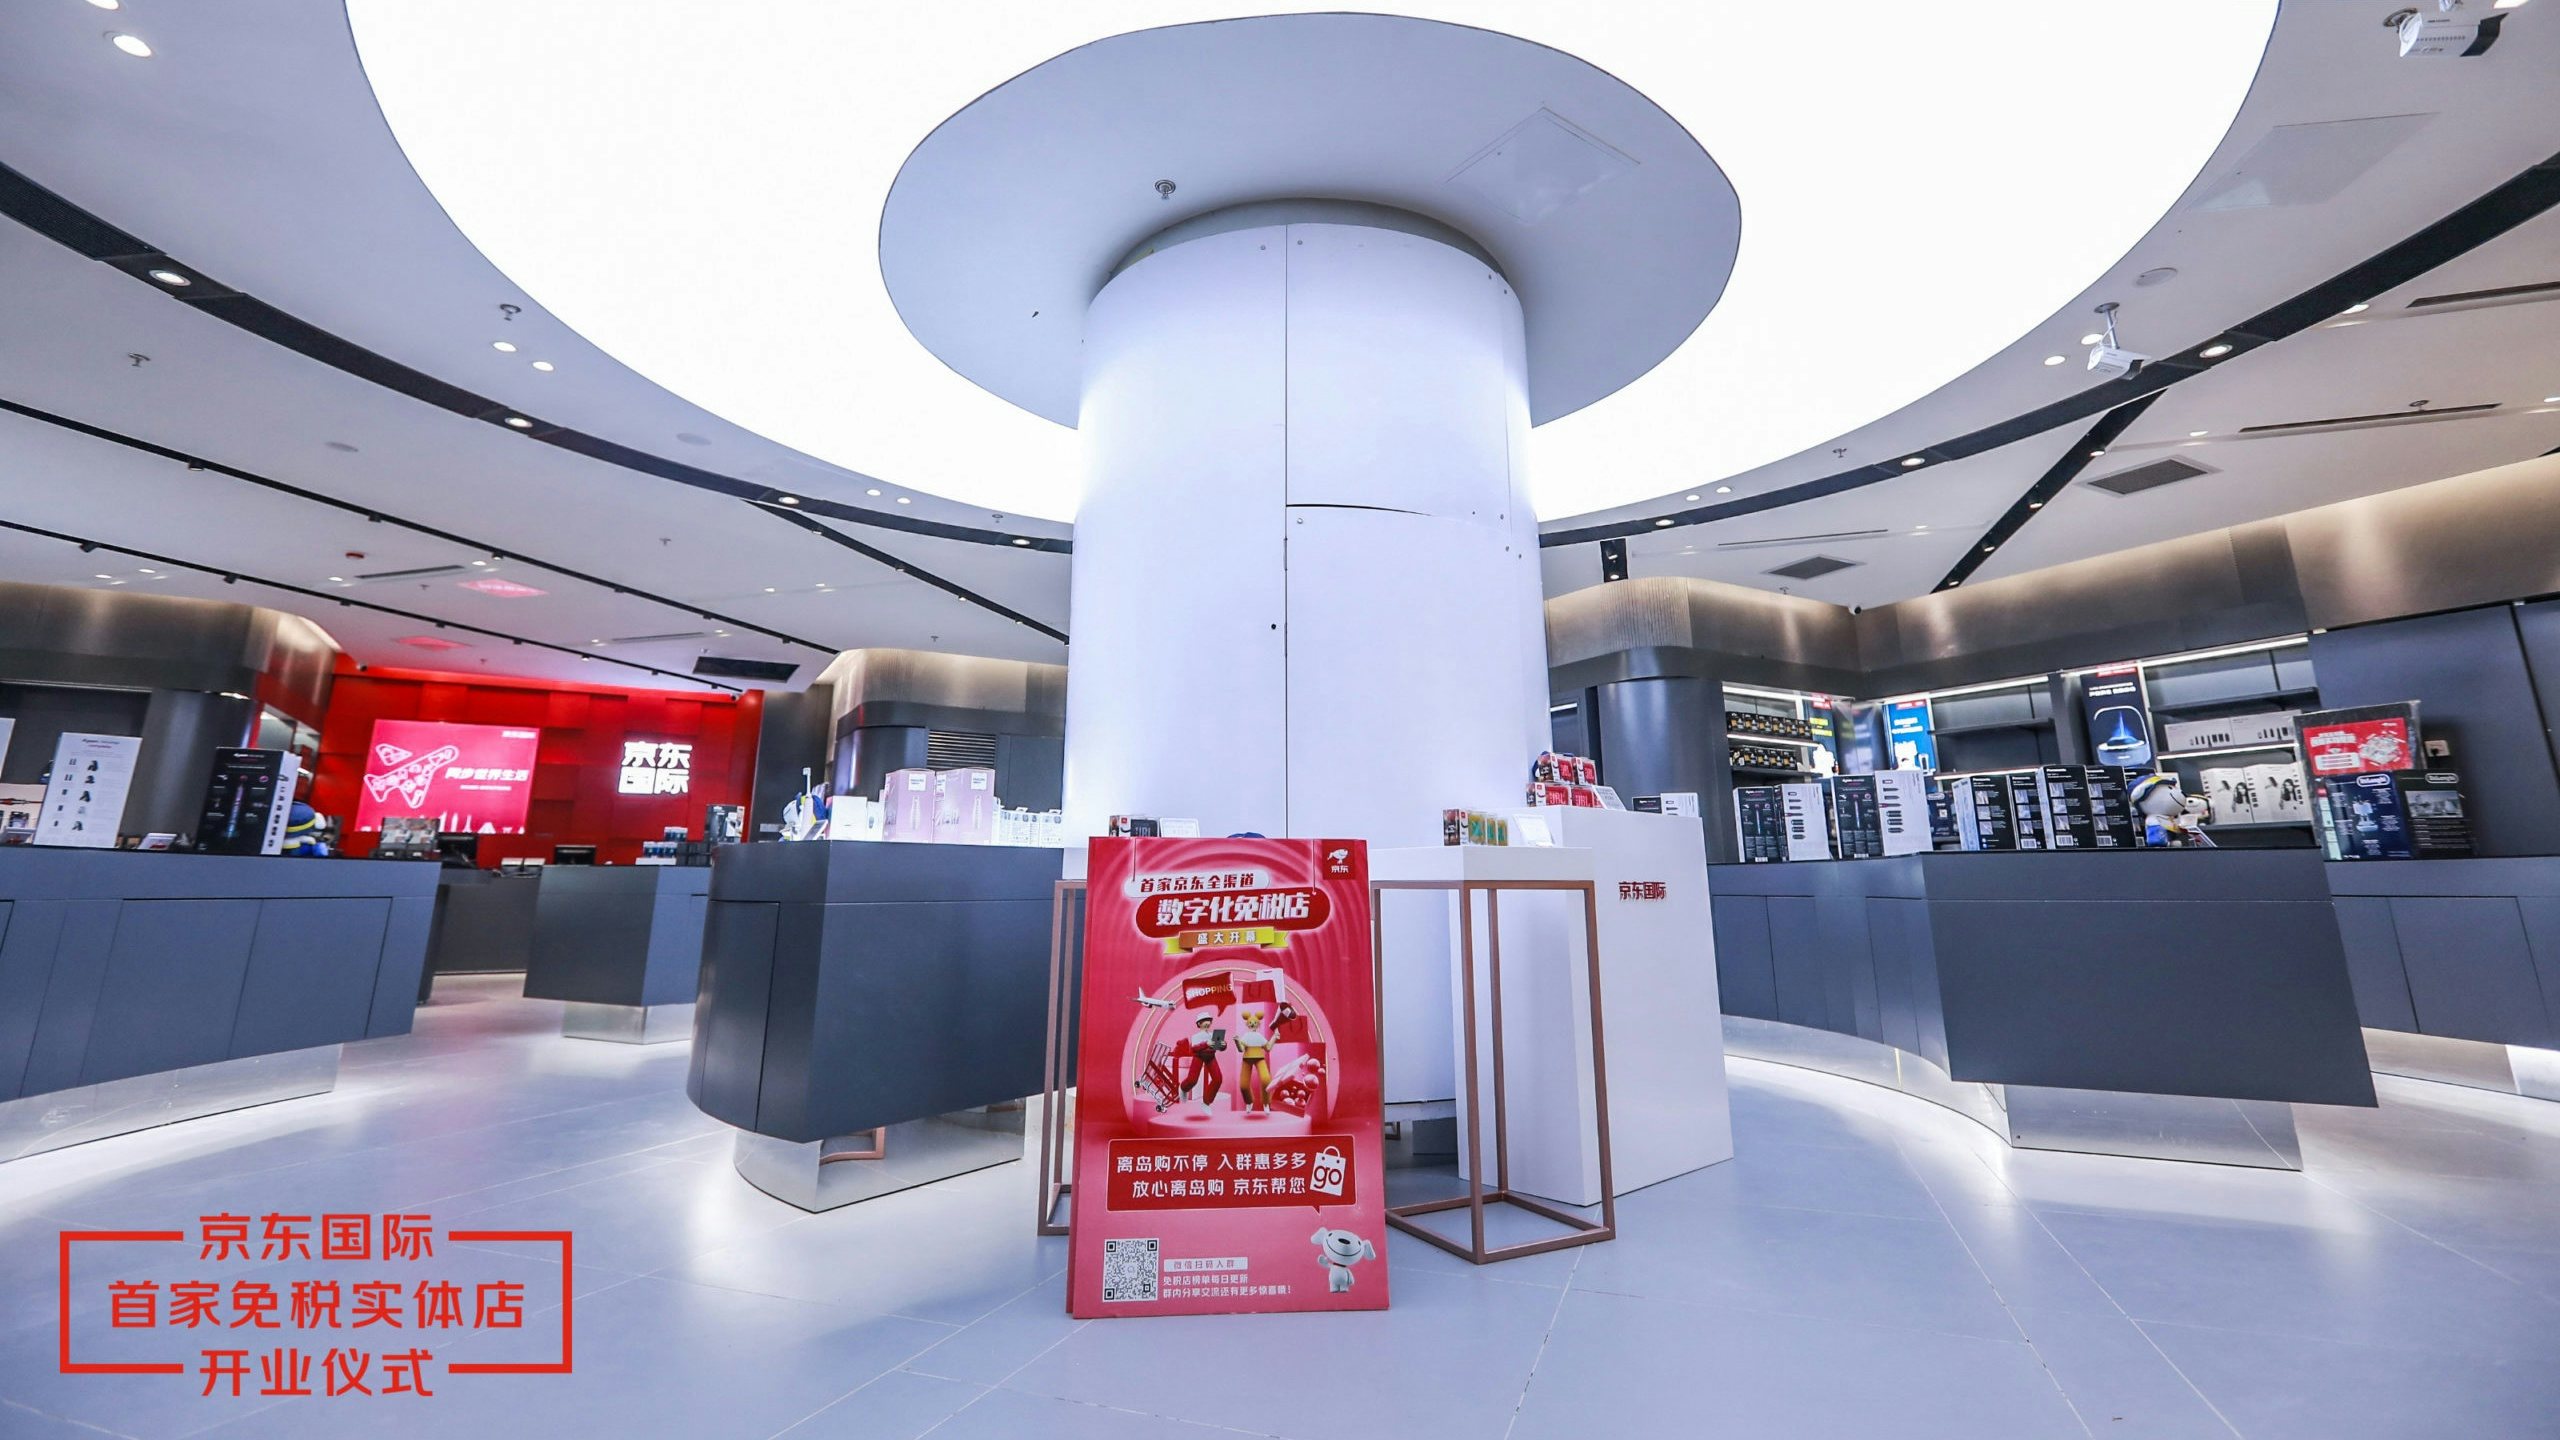 Although it tanked elsewhere, China’s travel retail market benefited from the relaxation of duty-free limits, the repatriation of wealth, and the country’s luxury appetite. Photo: Courtesy of JD